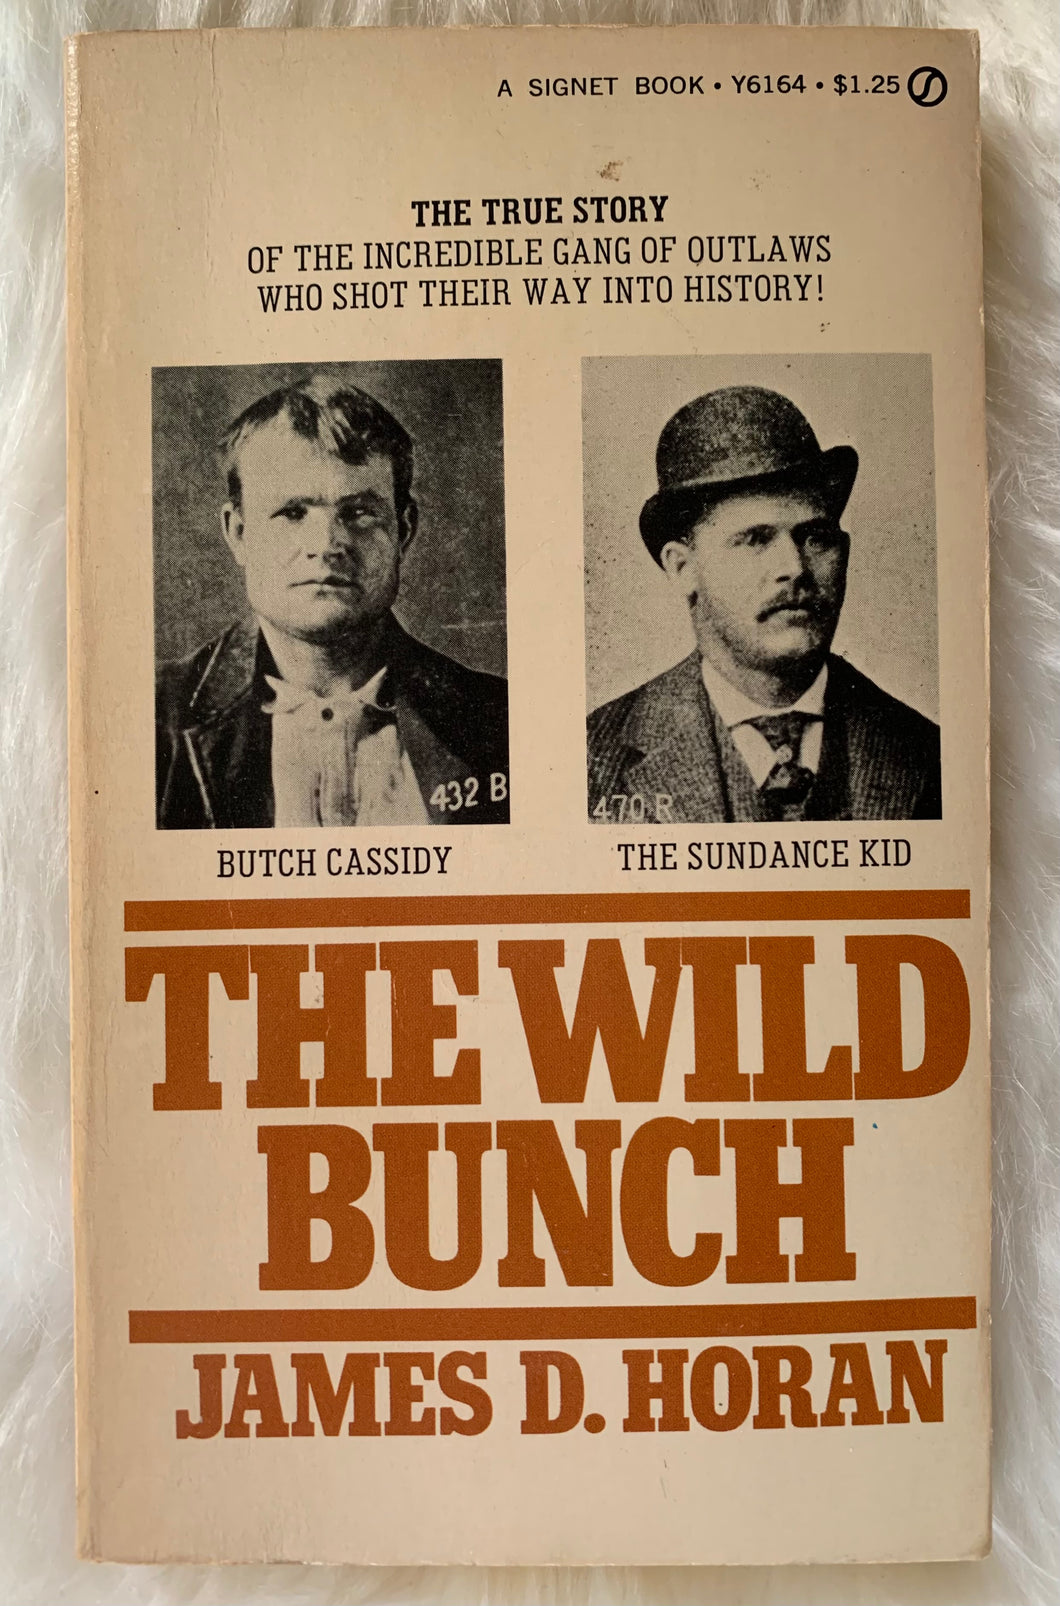 The Wild Bunch: The True Story of the Incredible Gang of Outlaws Who Shot Their Way Into History!